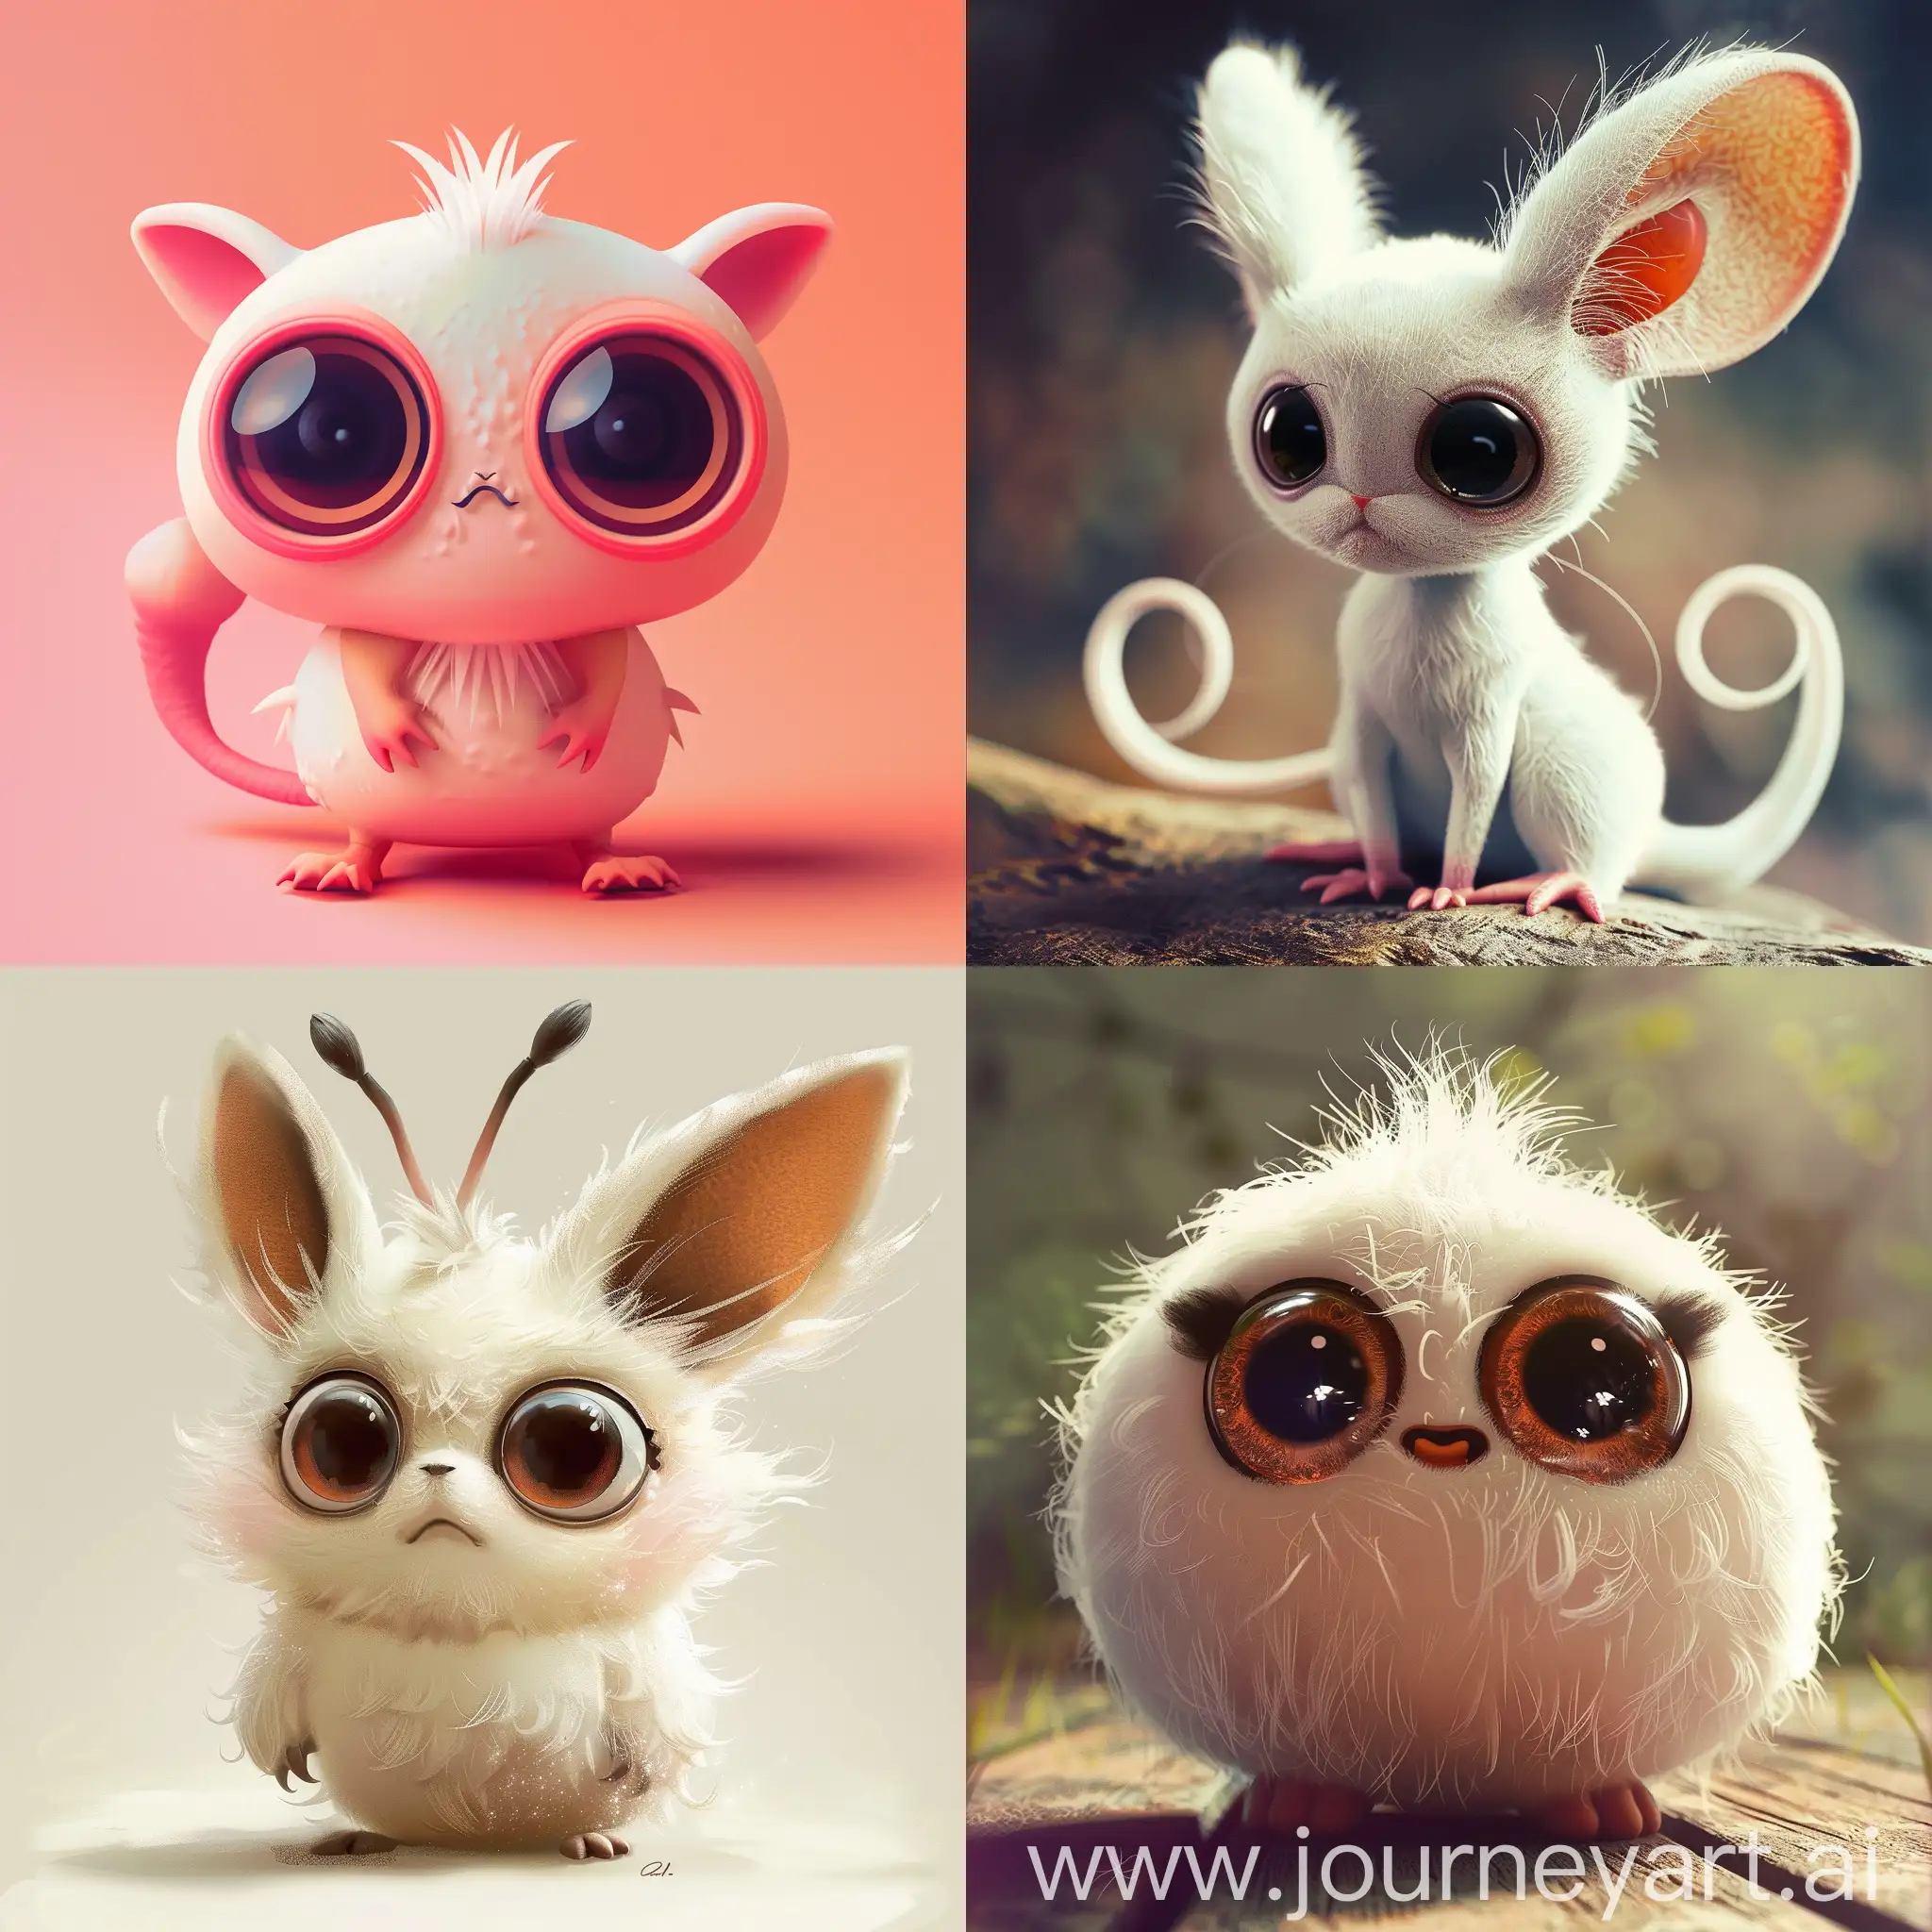 Adorable-ToonStyle-Creature-with-Big-Eyes